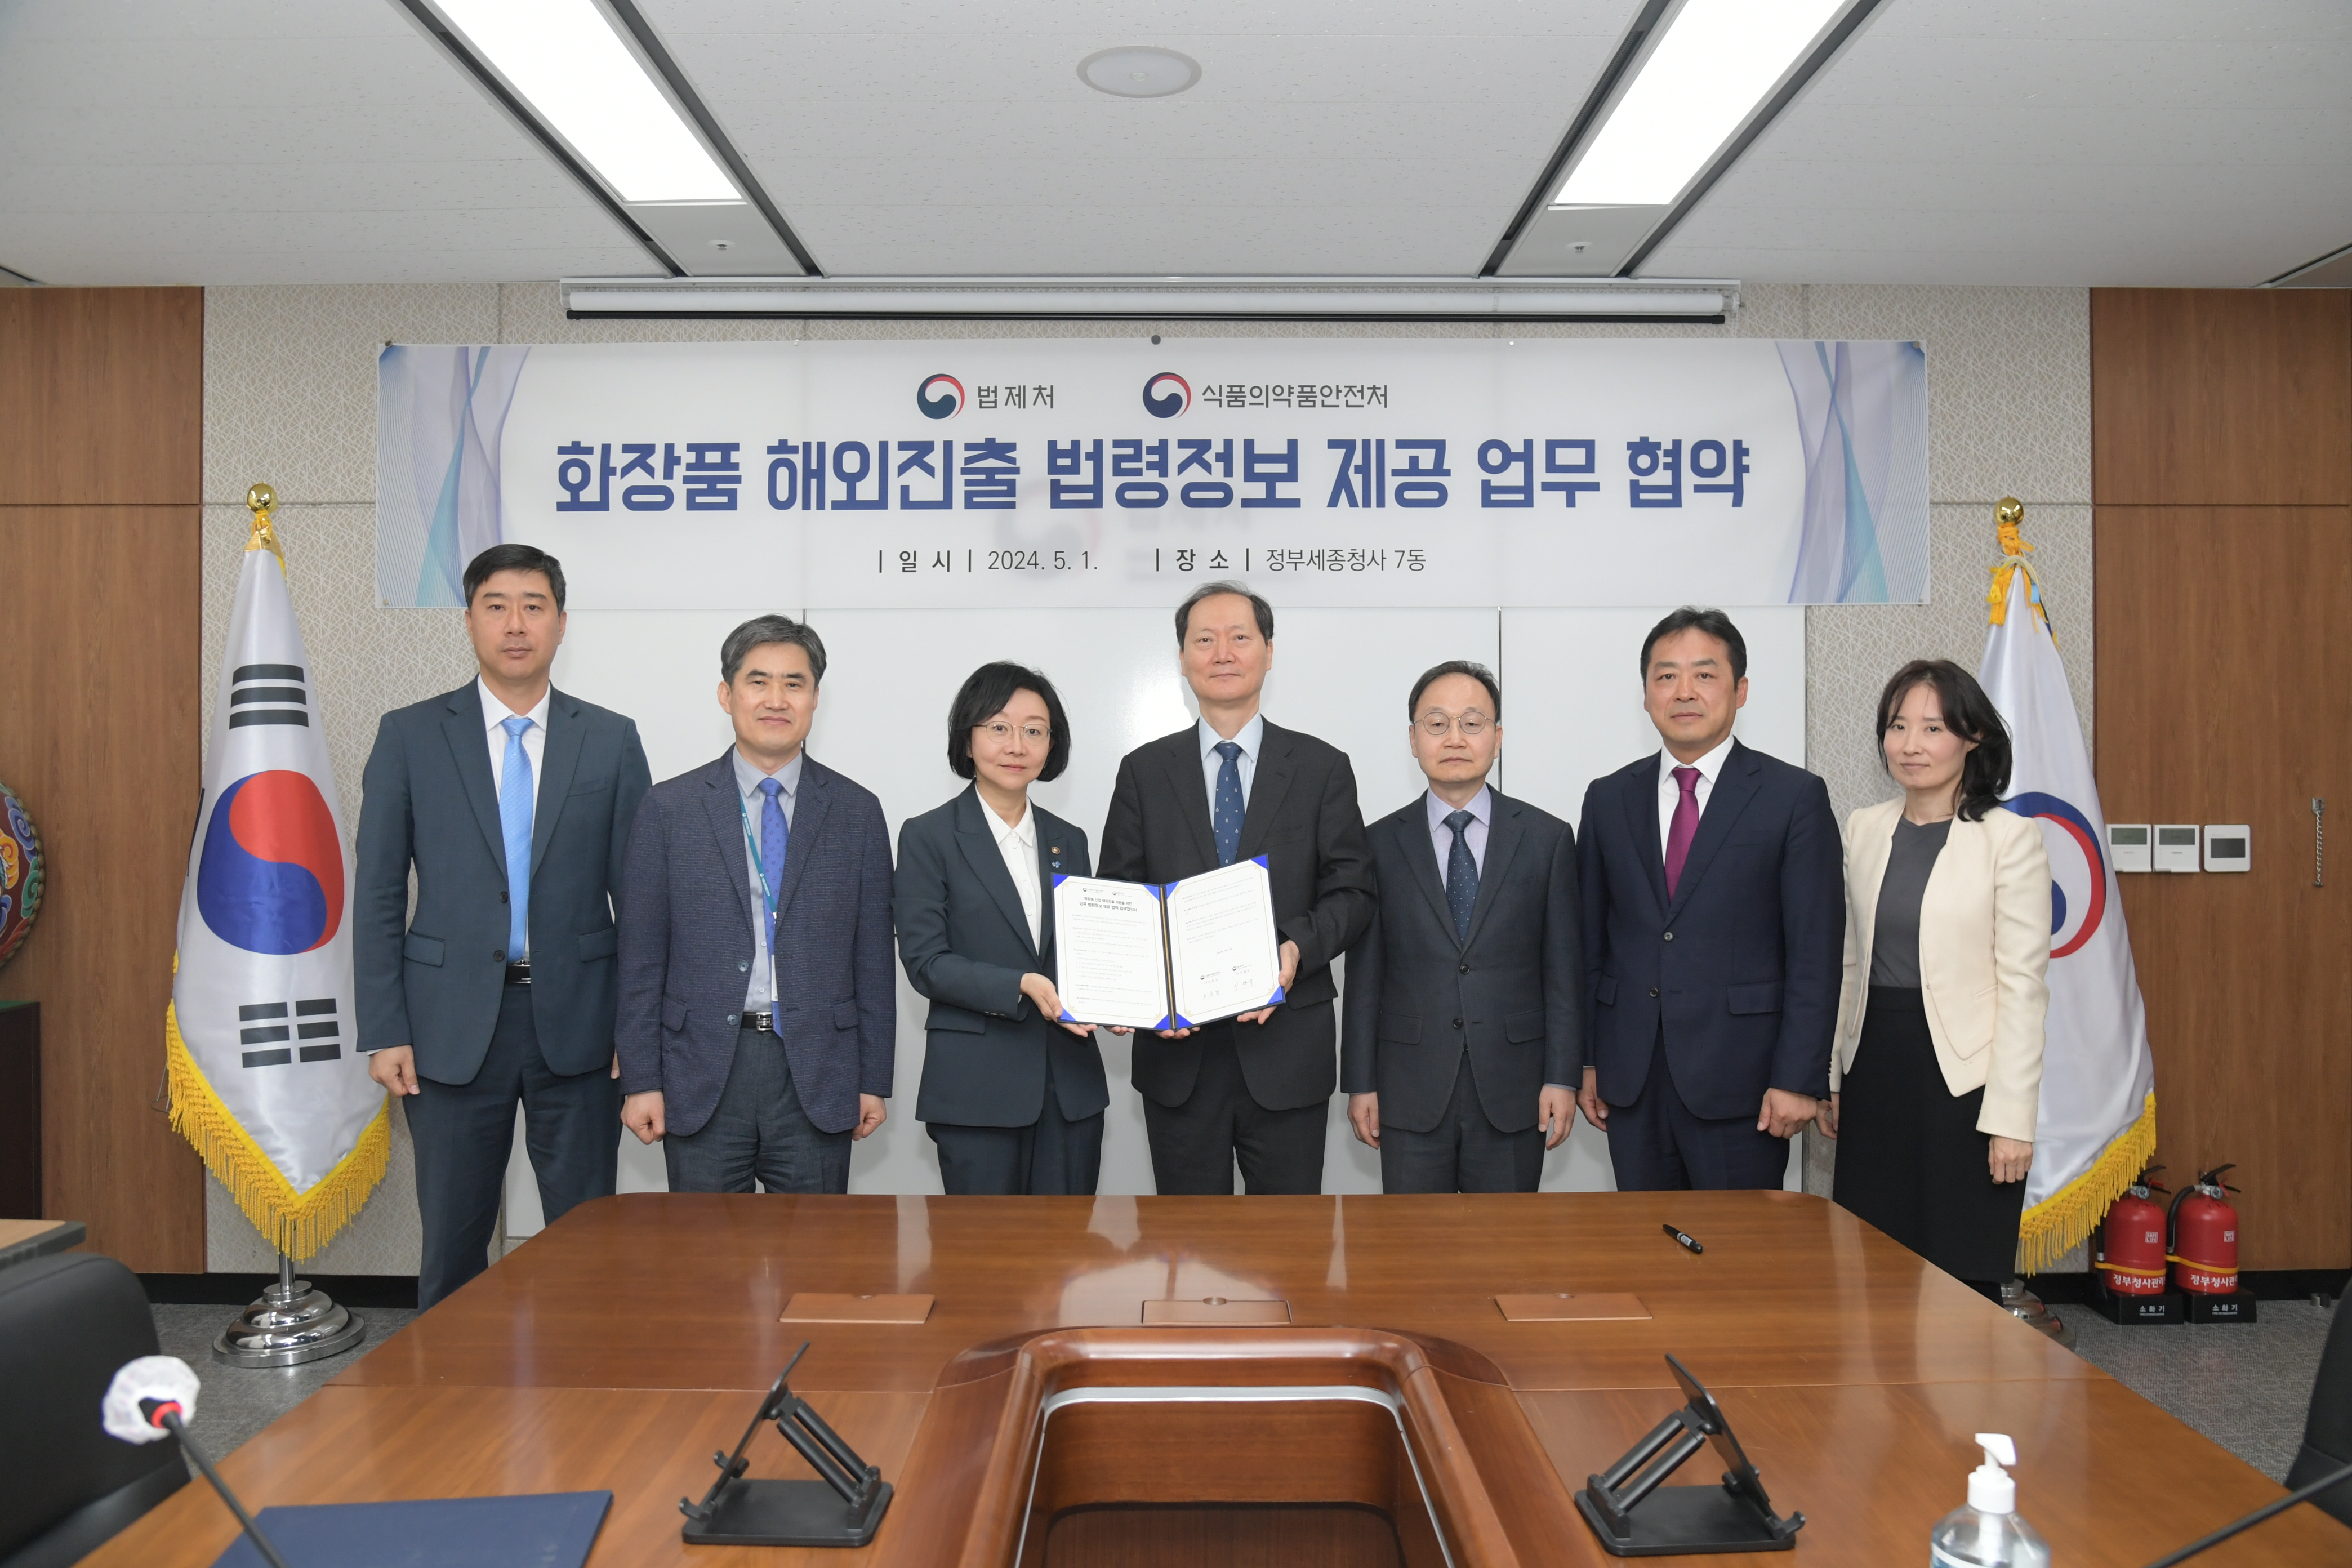 Photo News5 - Ministry of Food and Drug Safety and Ministry of Government Legislation, signing ceremony for ‘Agreement to provide legal information for overseas expansion of cosmetics’